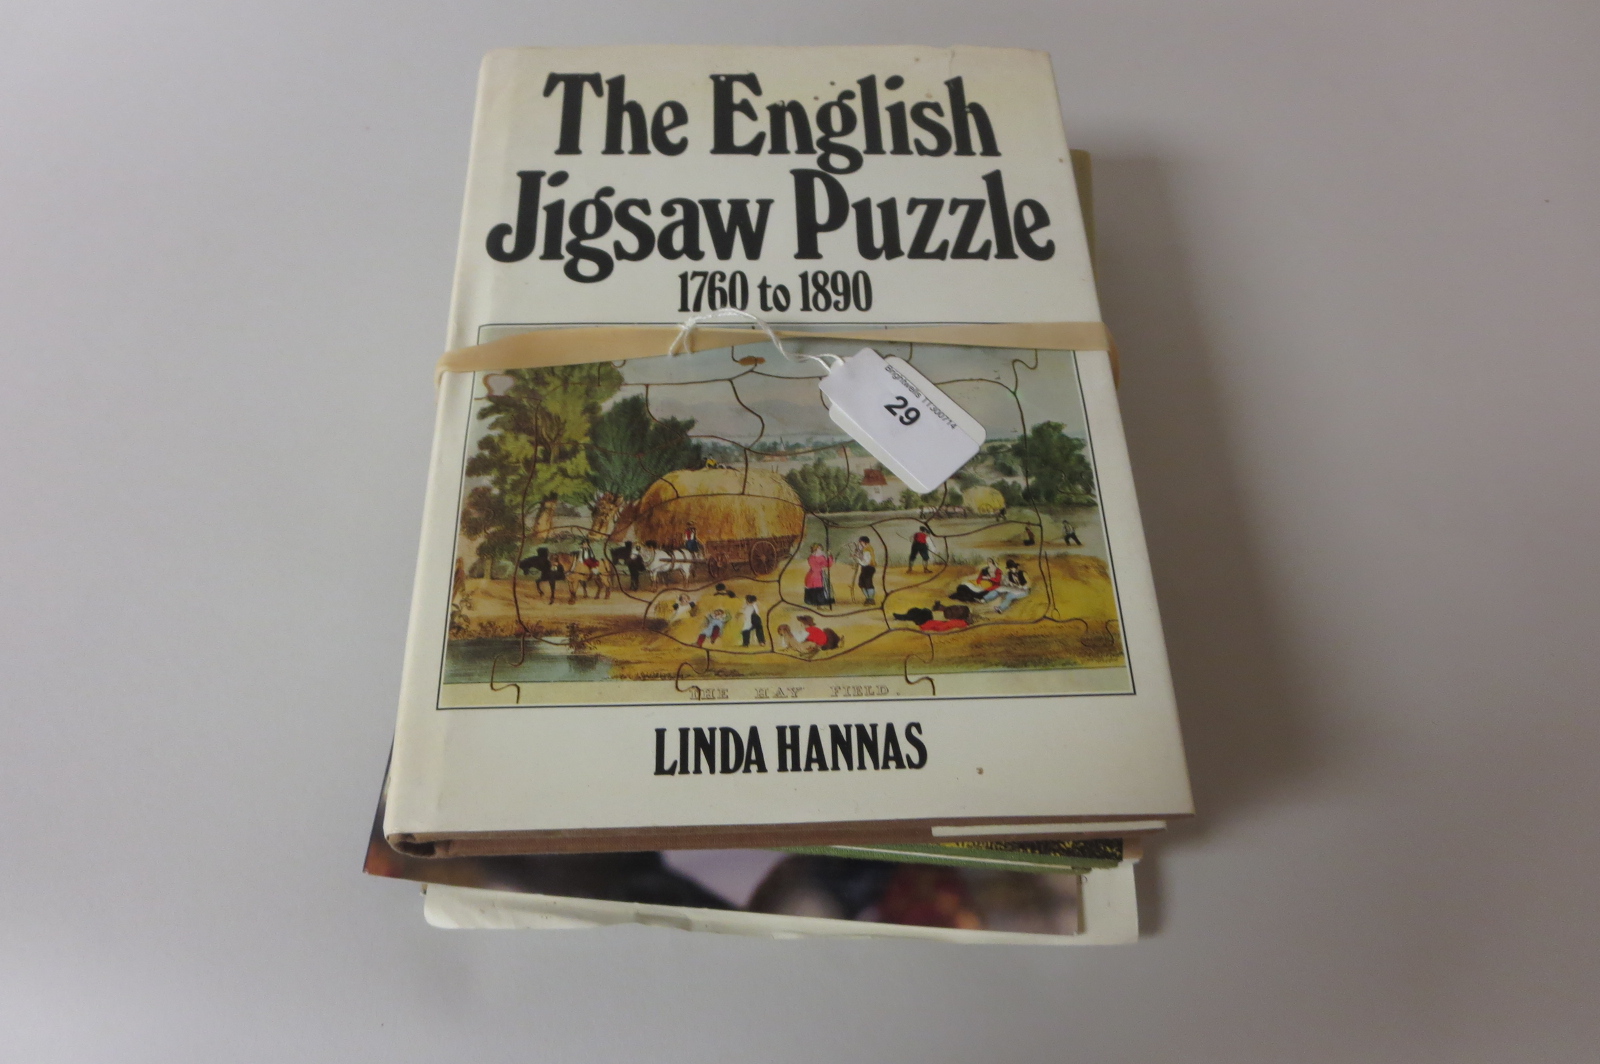 Hannas, Linda, The English Jigsaw Puzzle 1760-1890, Wayland. Blunt, Wilfred, The Ark in the Park.